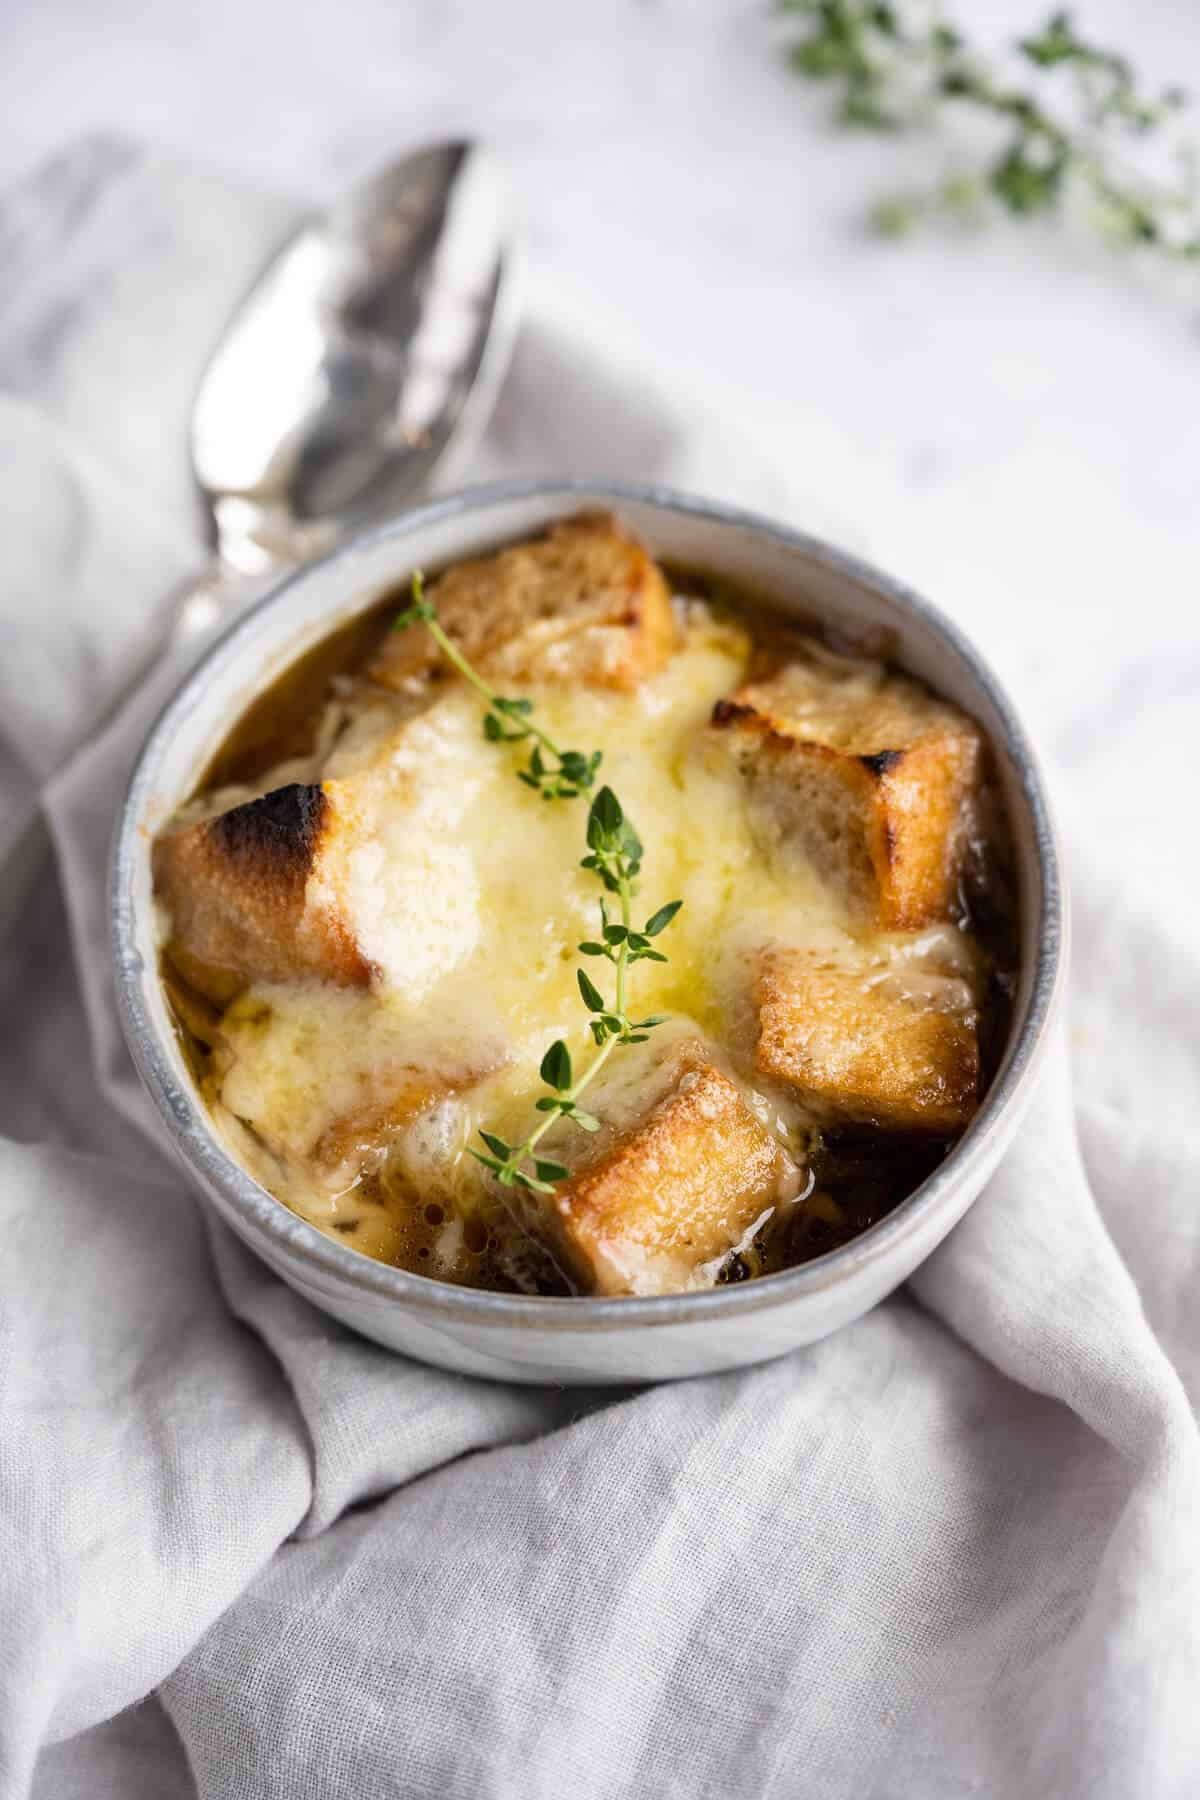 https://www.artfrommytable.com/wp-content/uploads/2022/01/Copycat_Panera_French_Onion_Soup_.jpg